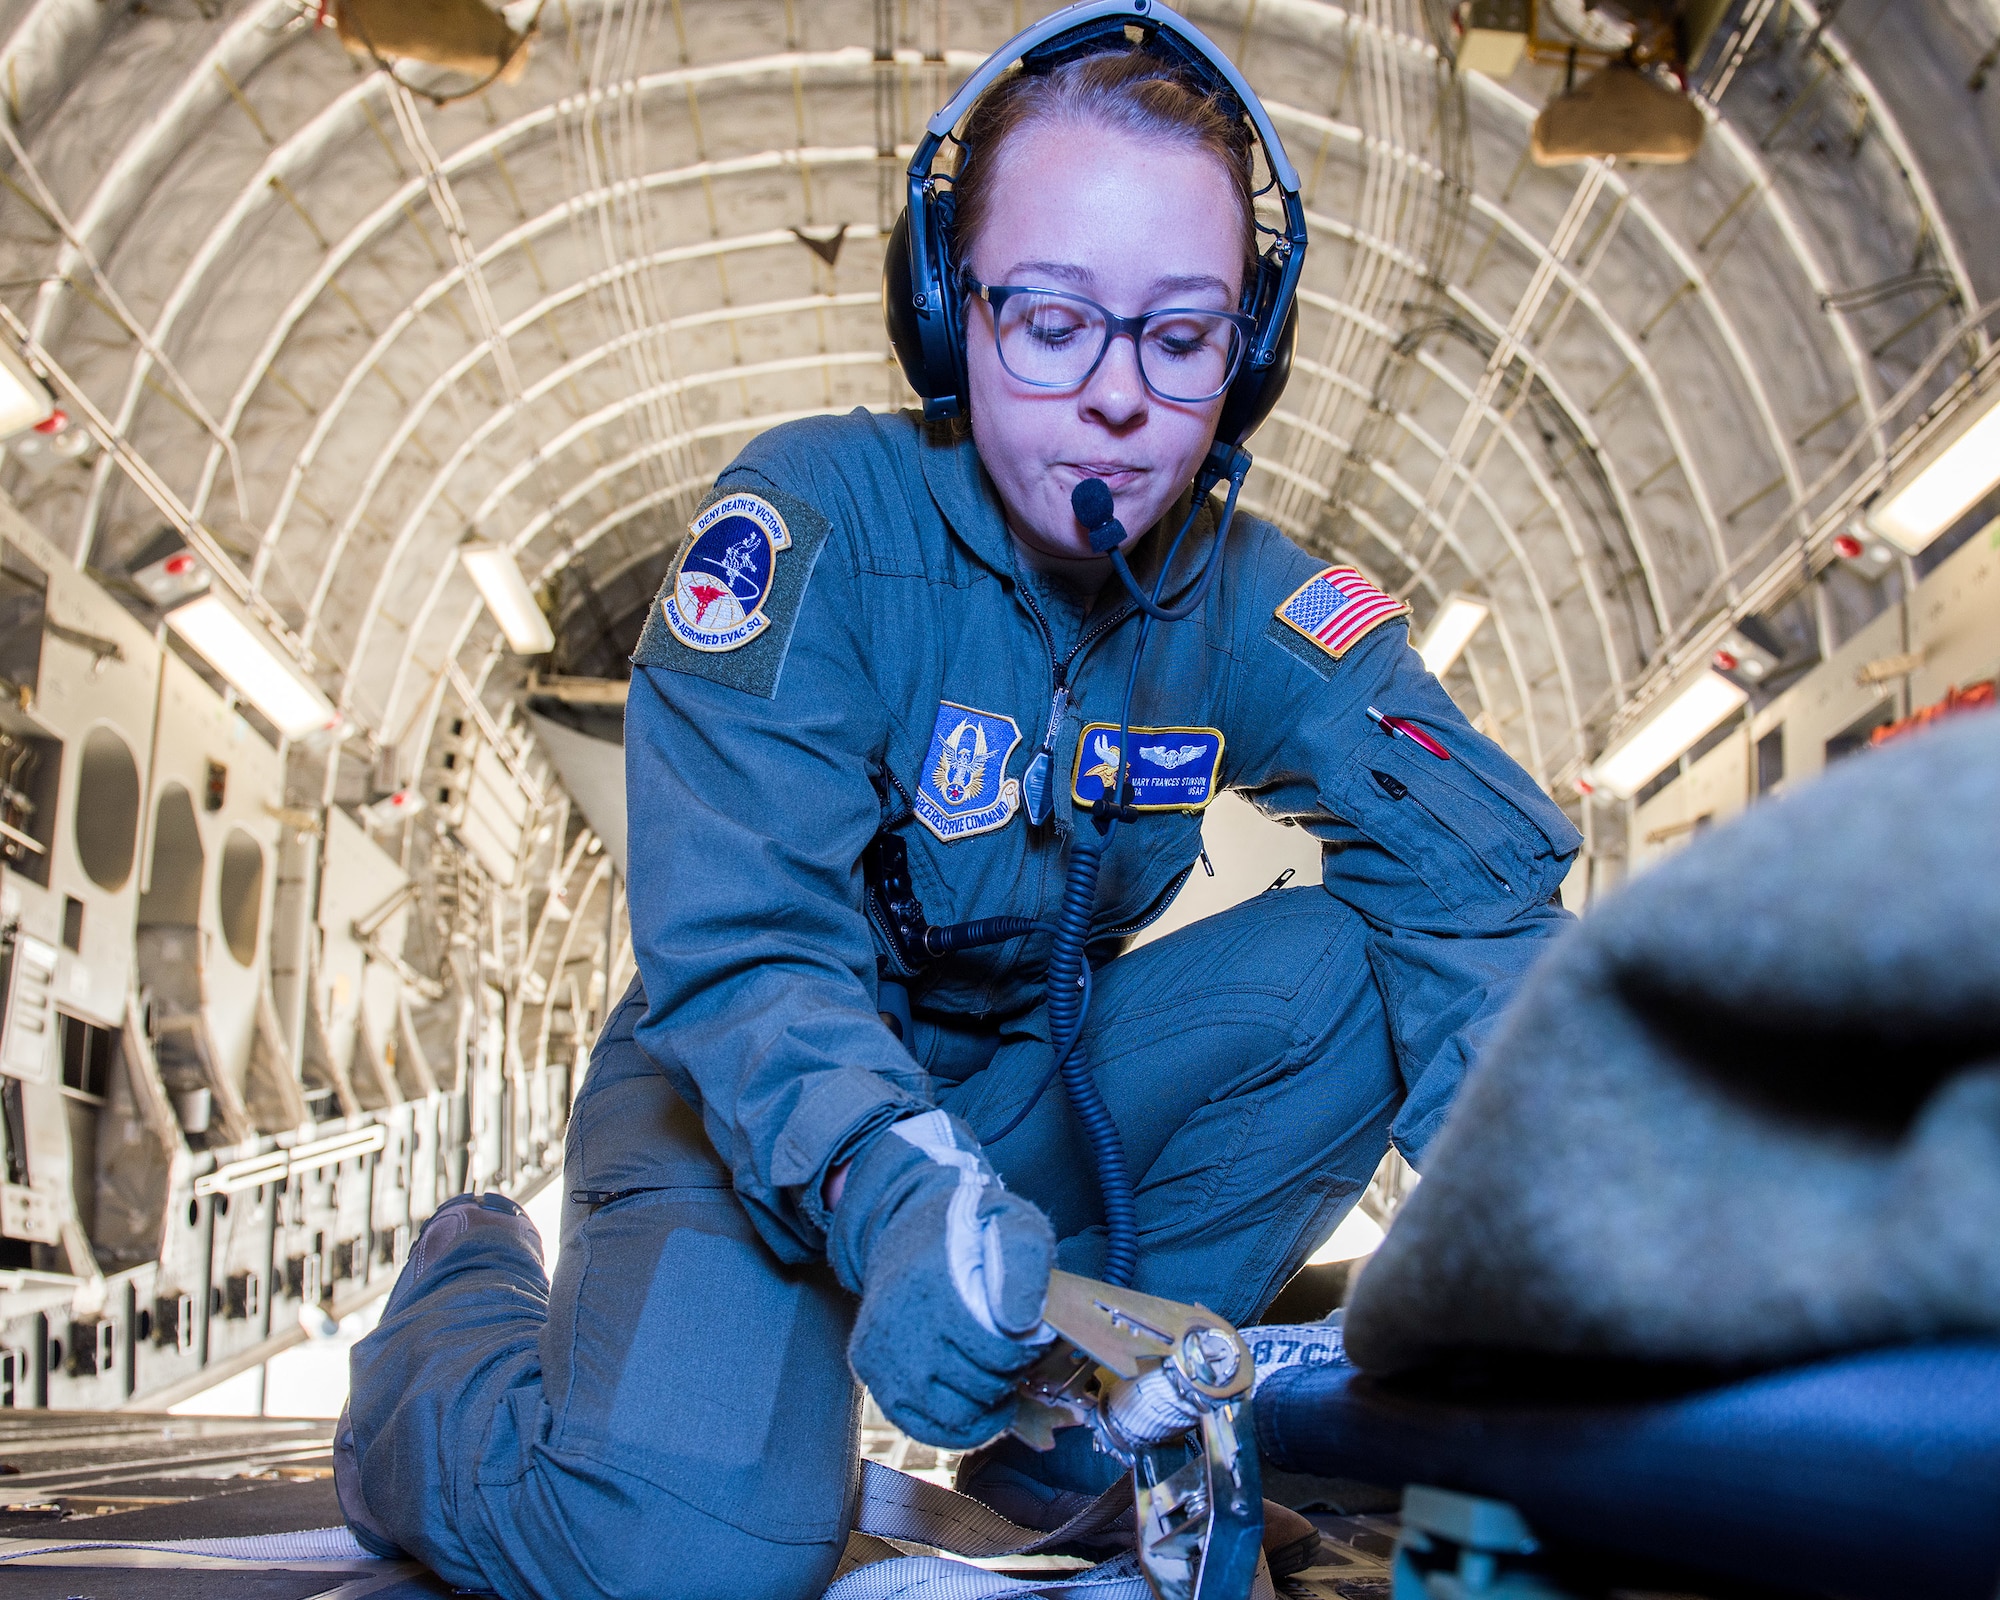 U.S. Air Force Senior Airman Mary Stinson, 934th Aeromedical Evacuation Squadron, secures simulated patients on a C-17 Globemaster III aircraft during Exercise Ultimate Caduceus 2018 at Travis Air Force Base, California, Aug. 22, 2018. Ultimate Caduceus 2018 is an annual patient movement exercise designed to test the ability of U.S. Transportation Command to provide medical evacuation. (U.S. Air Force photo by Louis Briscese)